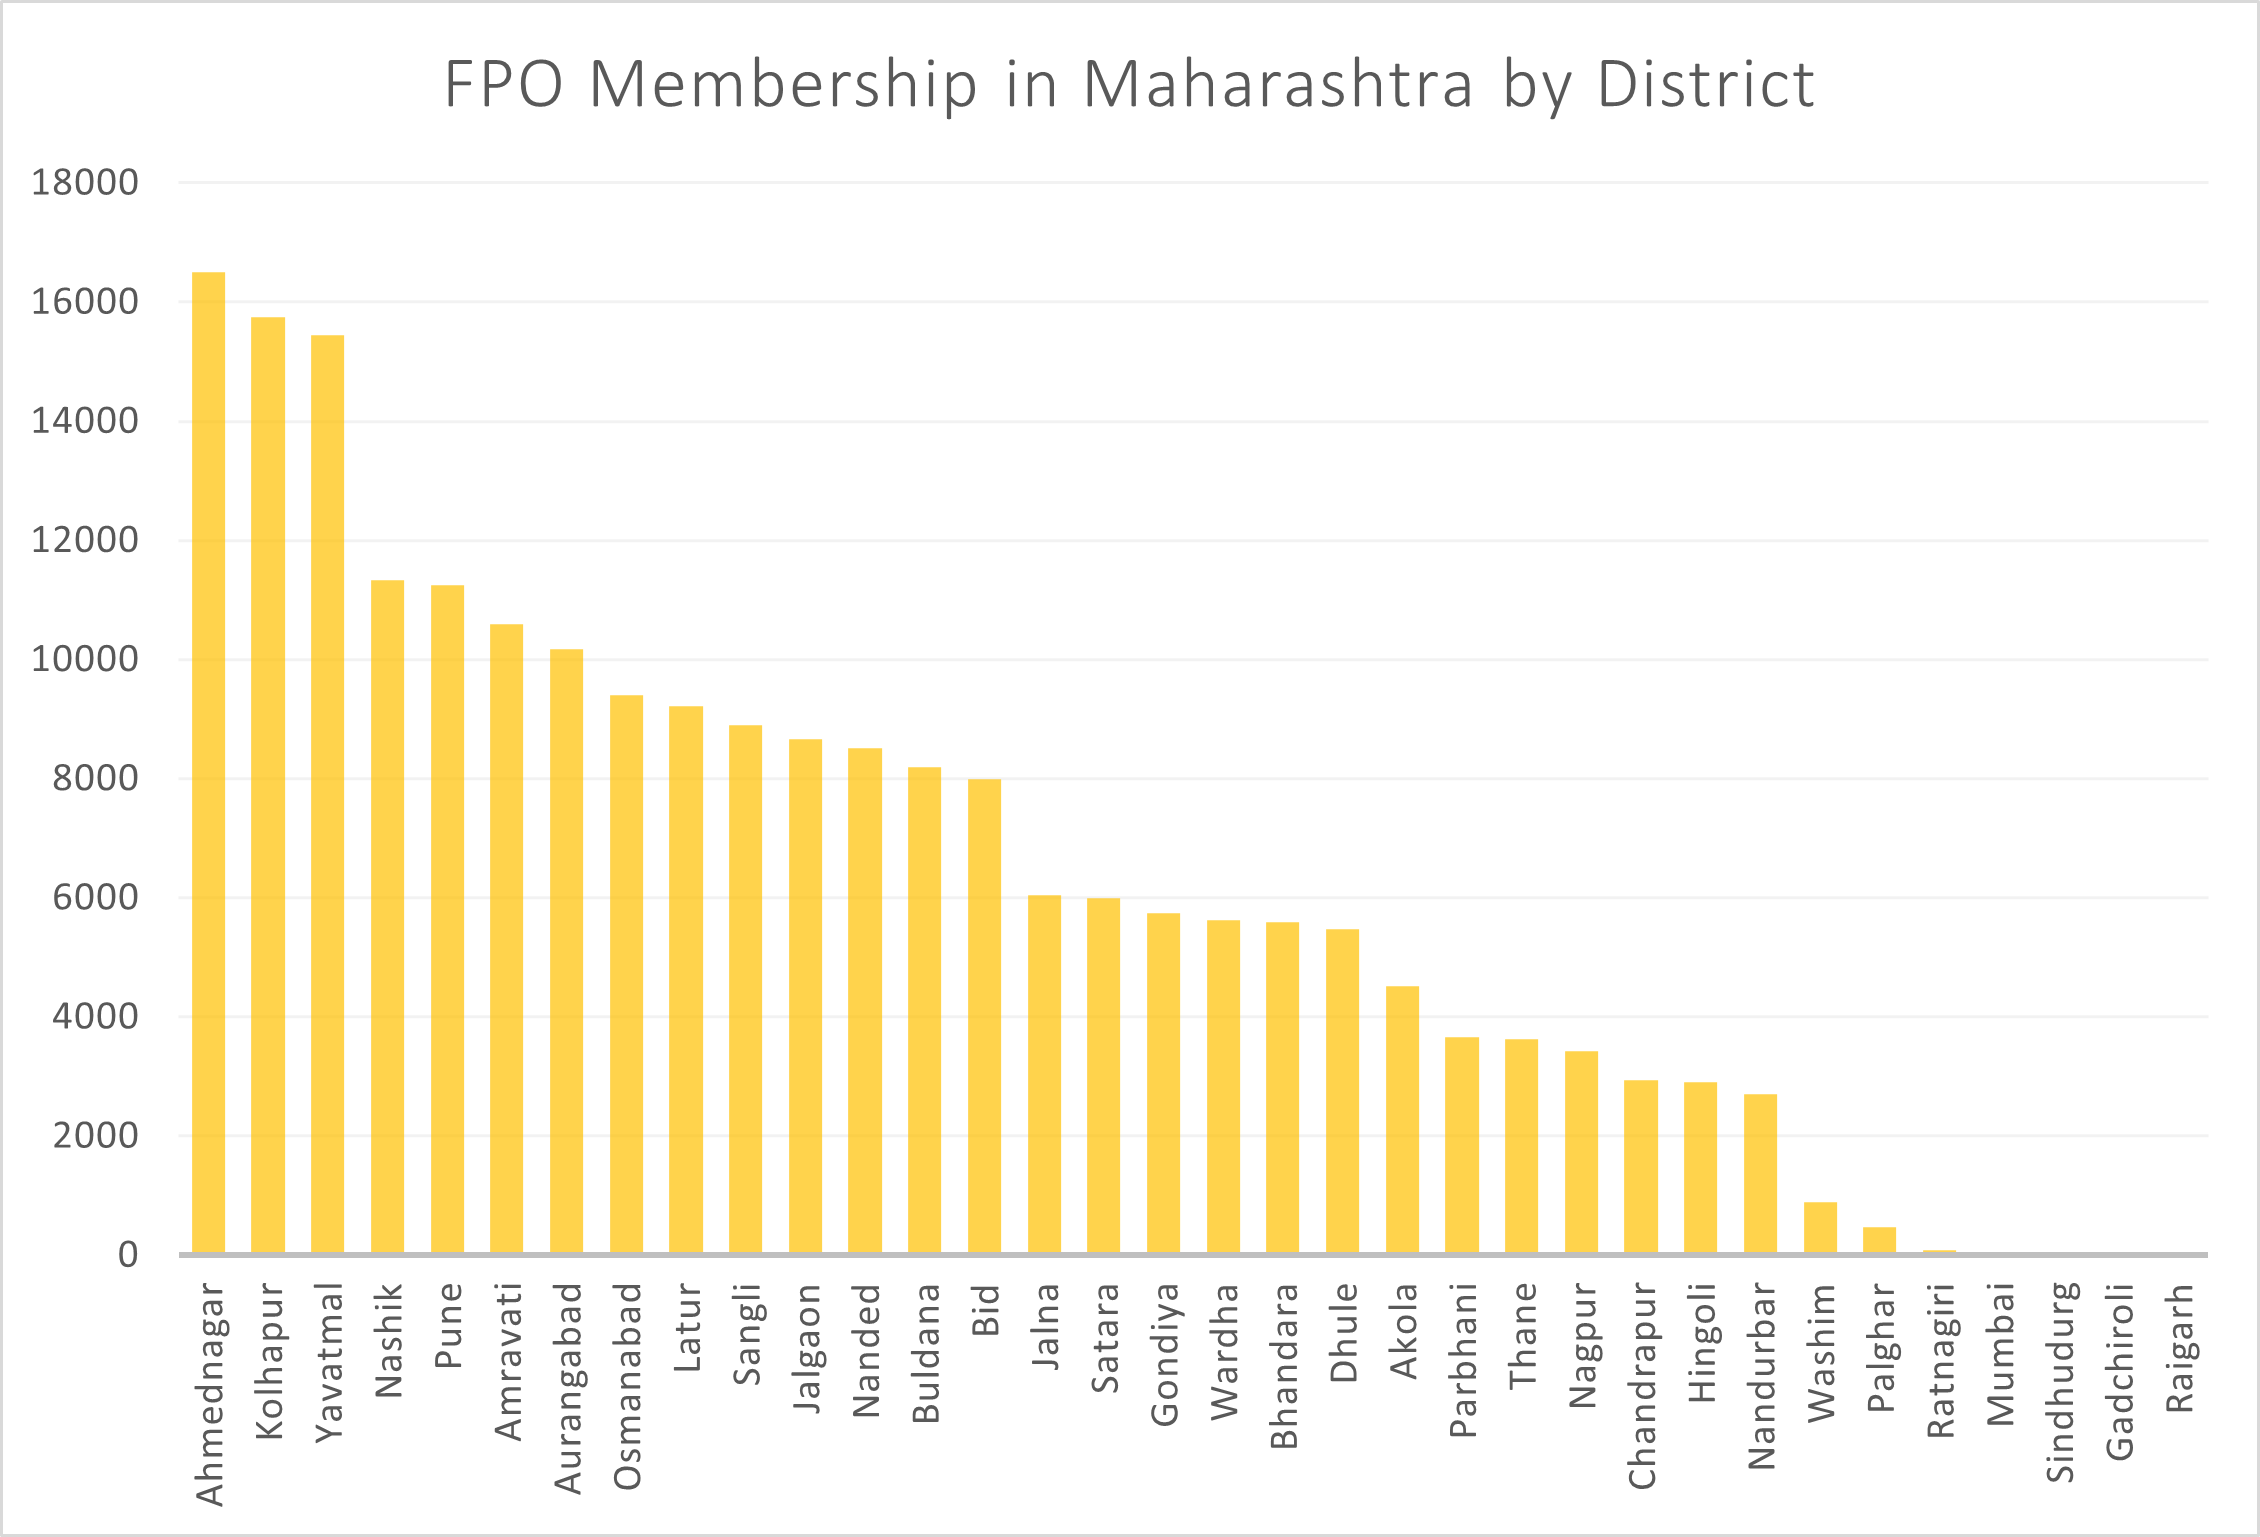 FPO membership in Maharashtra by district